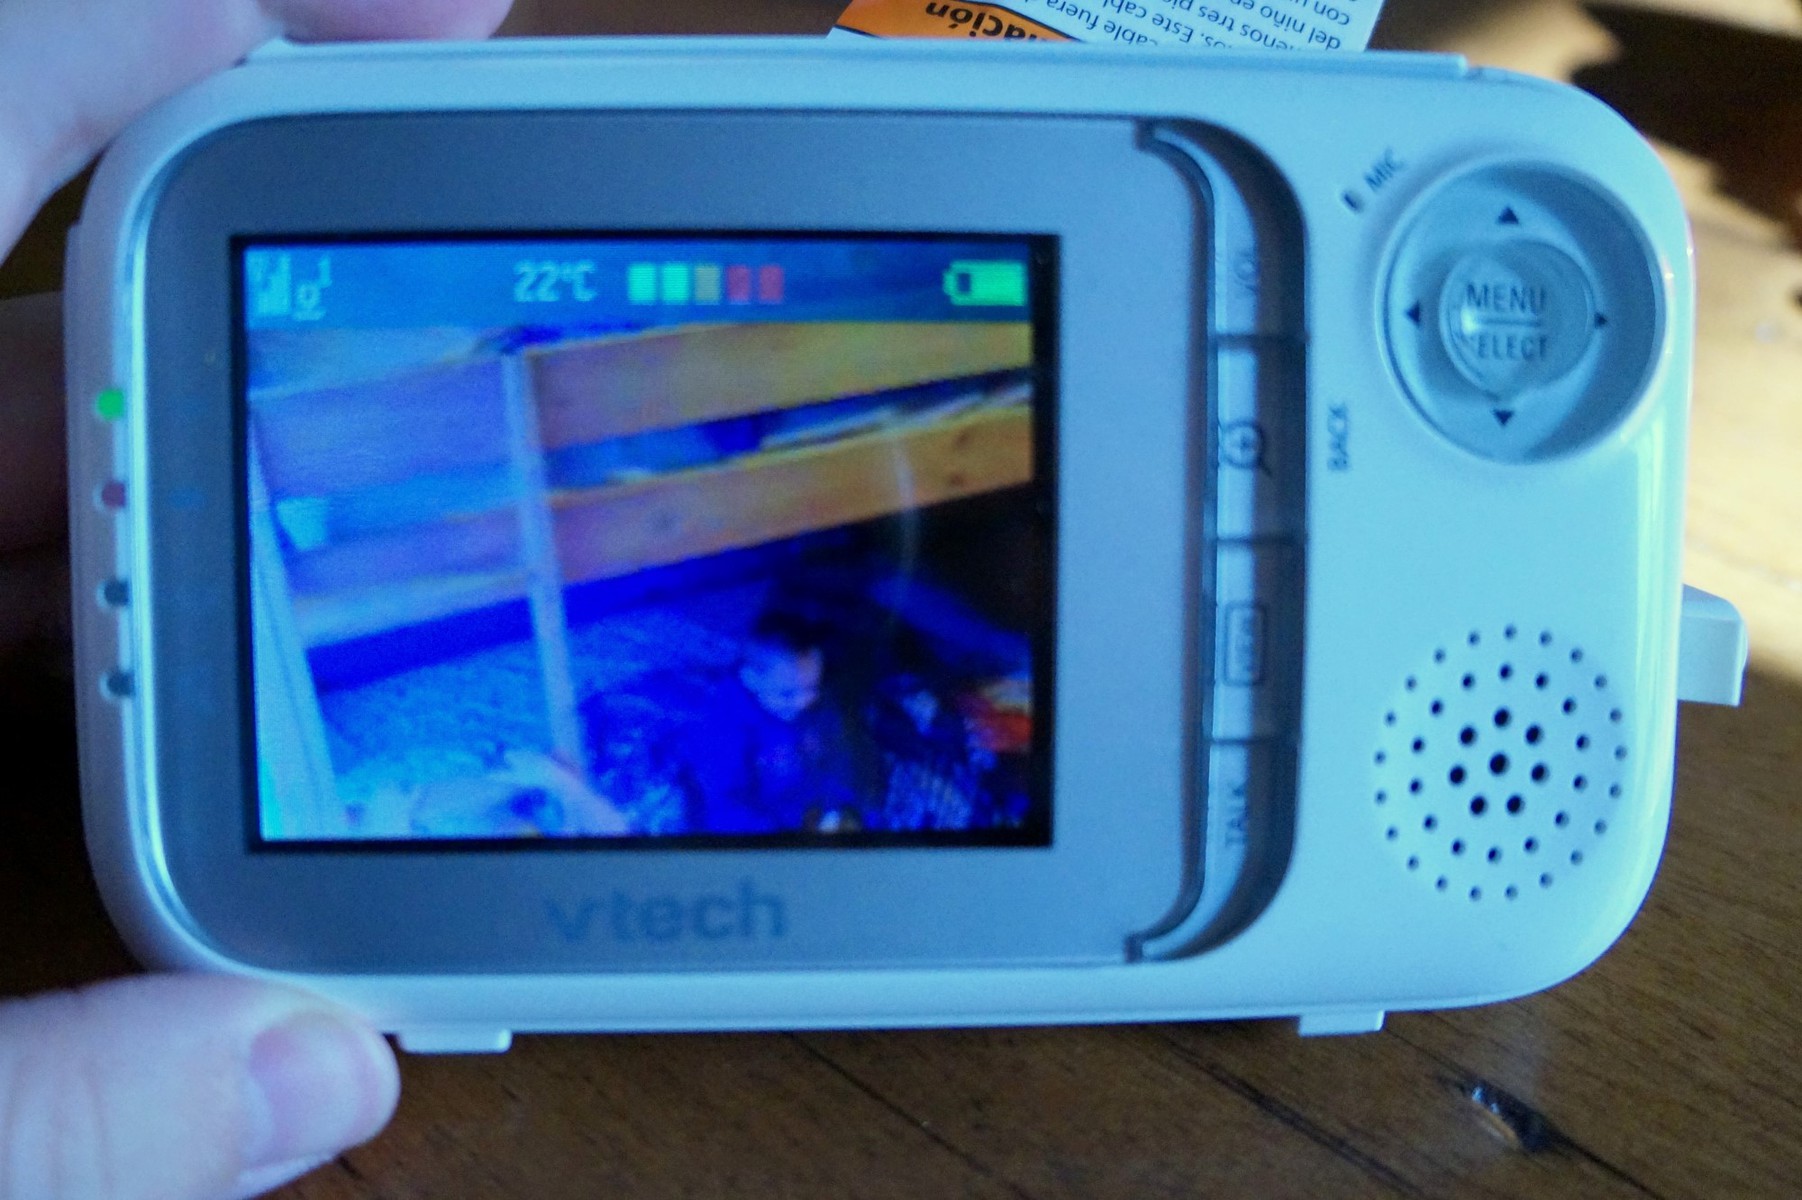 Baby Monitors Are For More Than Just Babies! VTech Video Monitor